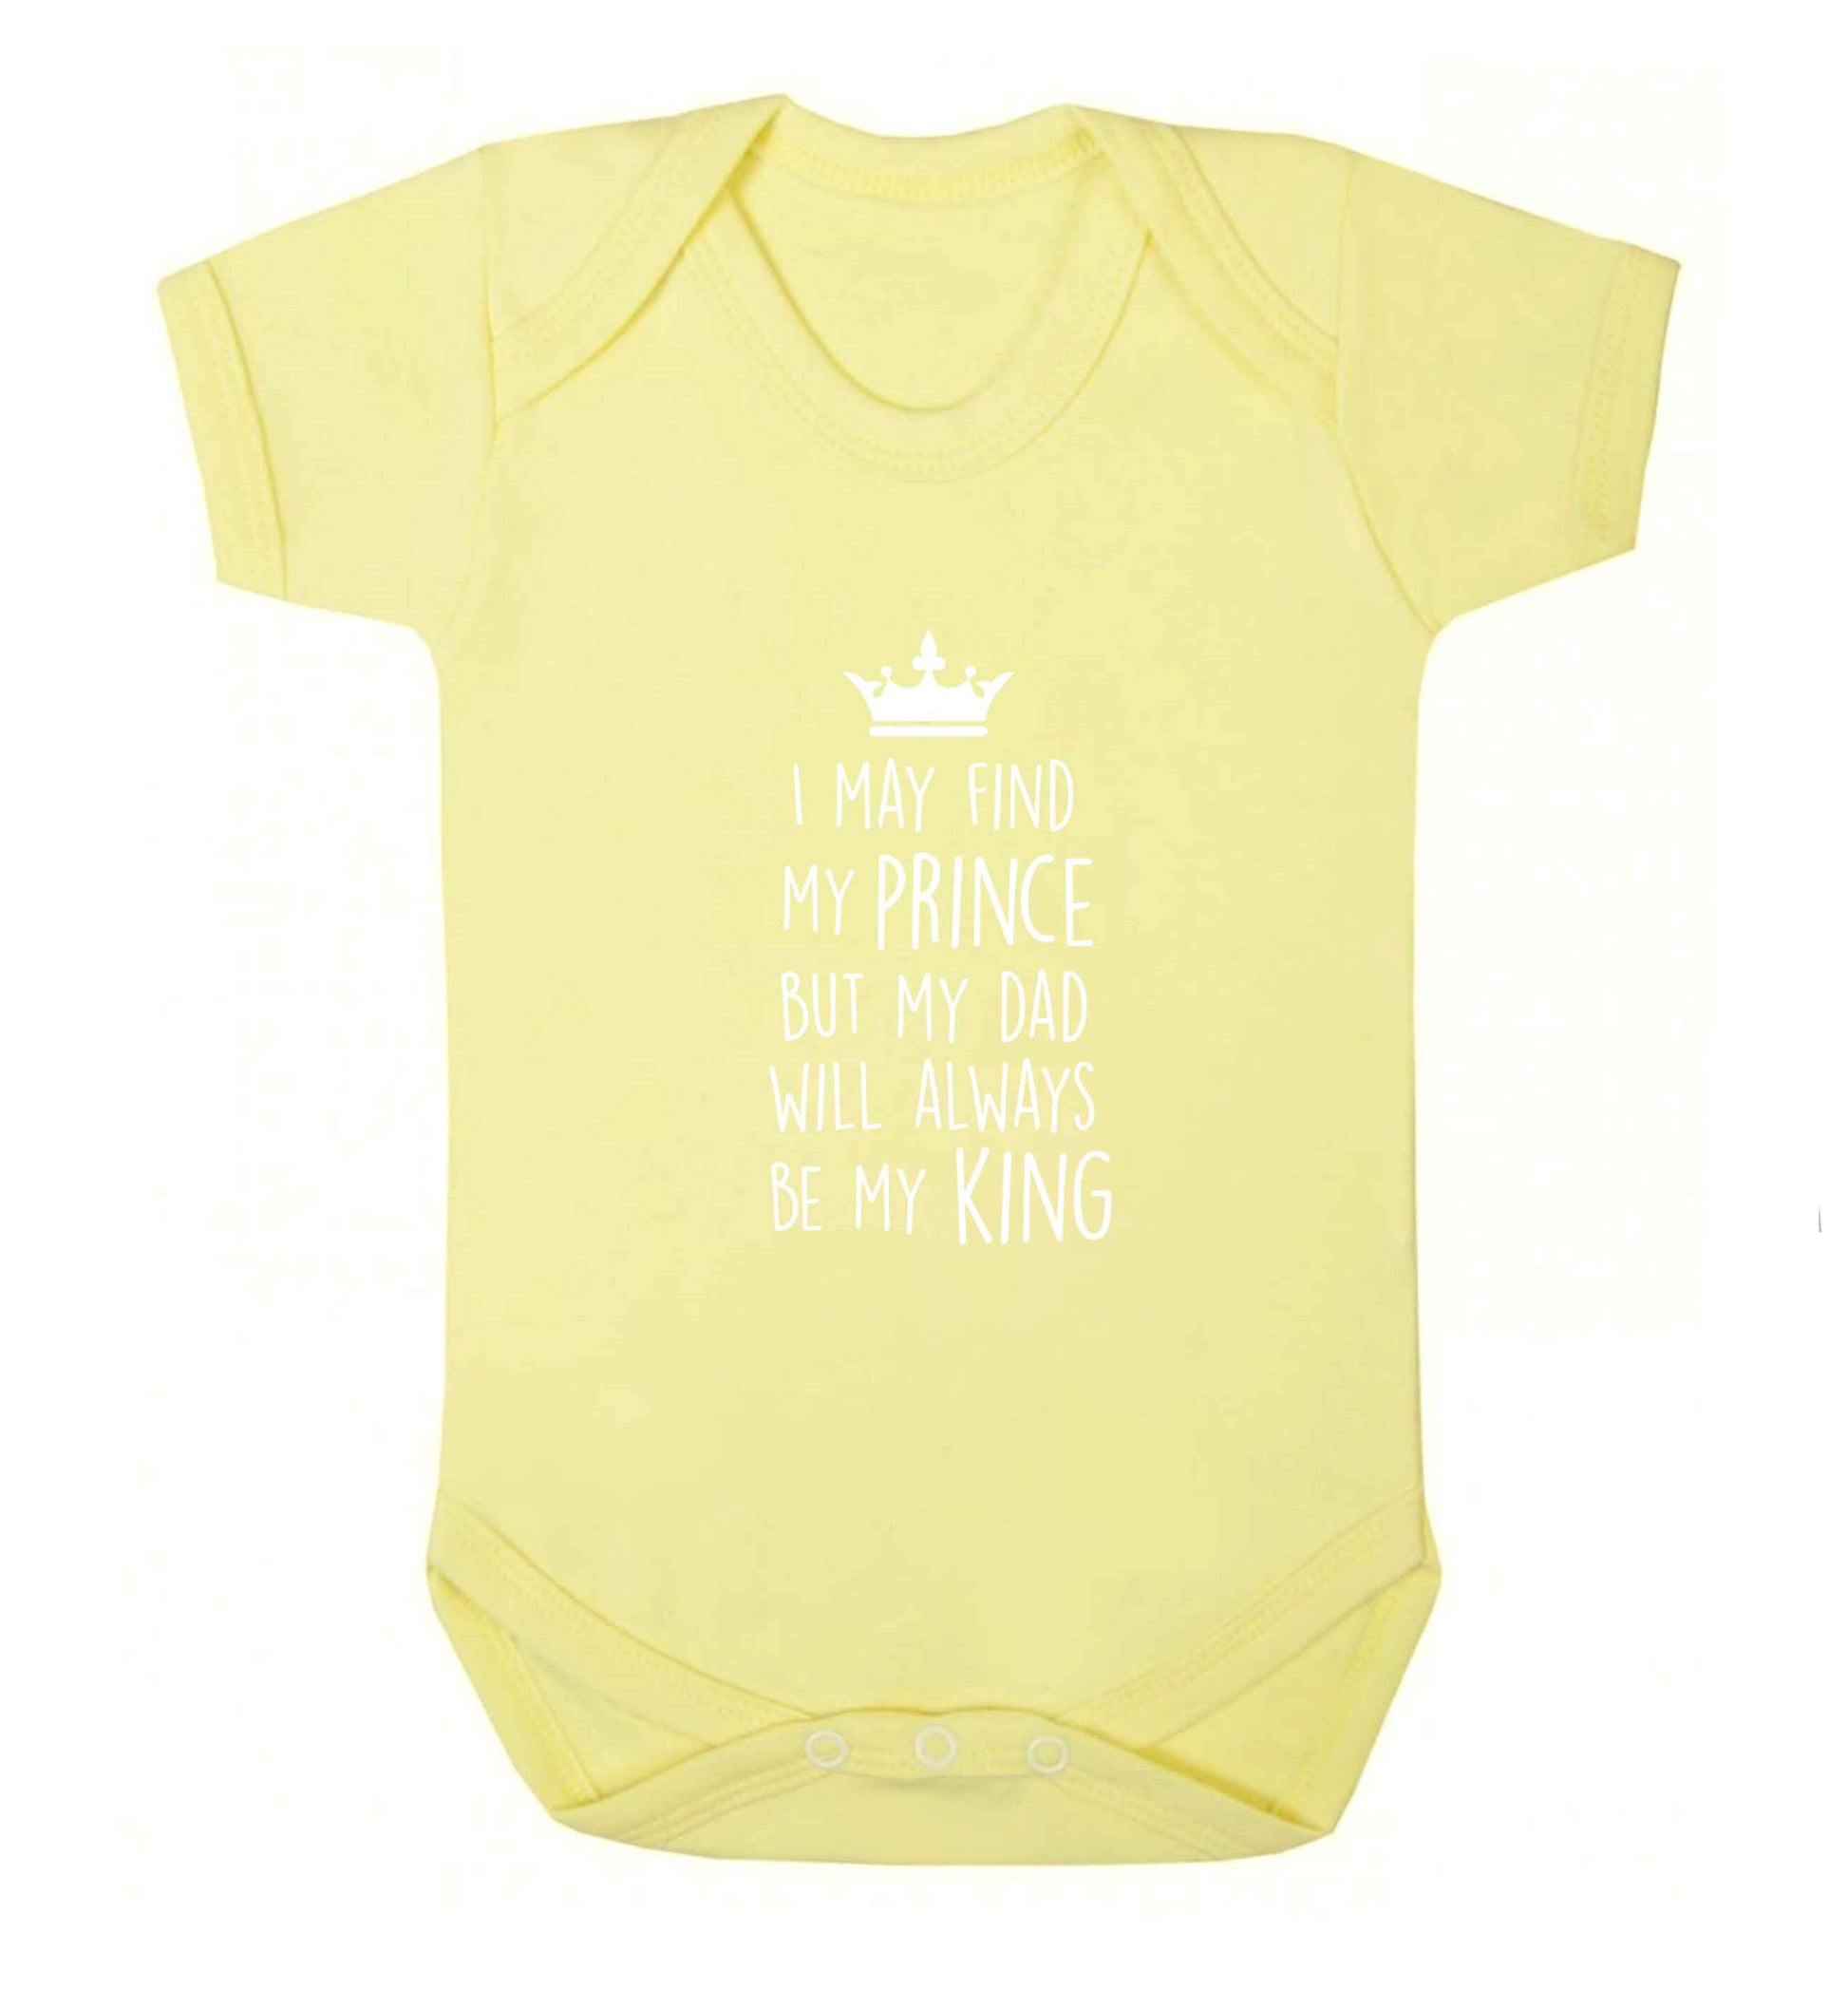 I may find my prince but my dad will always be my king baby vest pale yellow 18-24 months